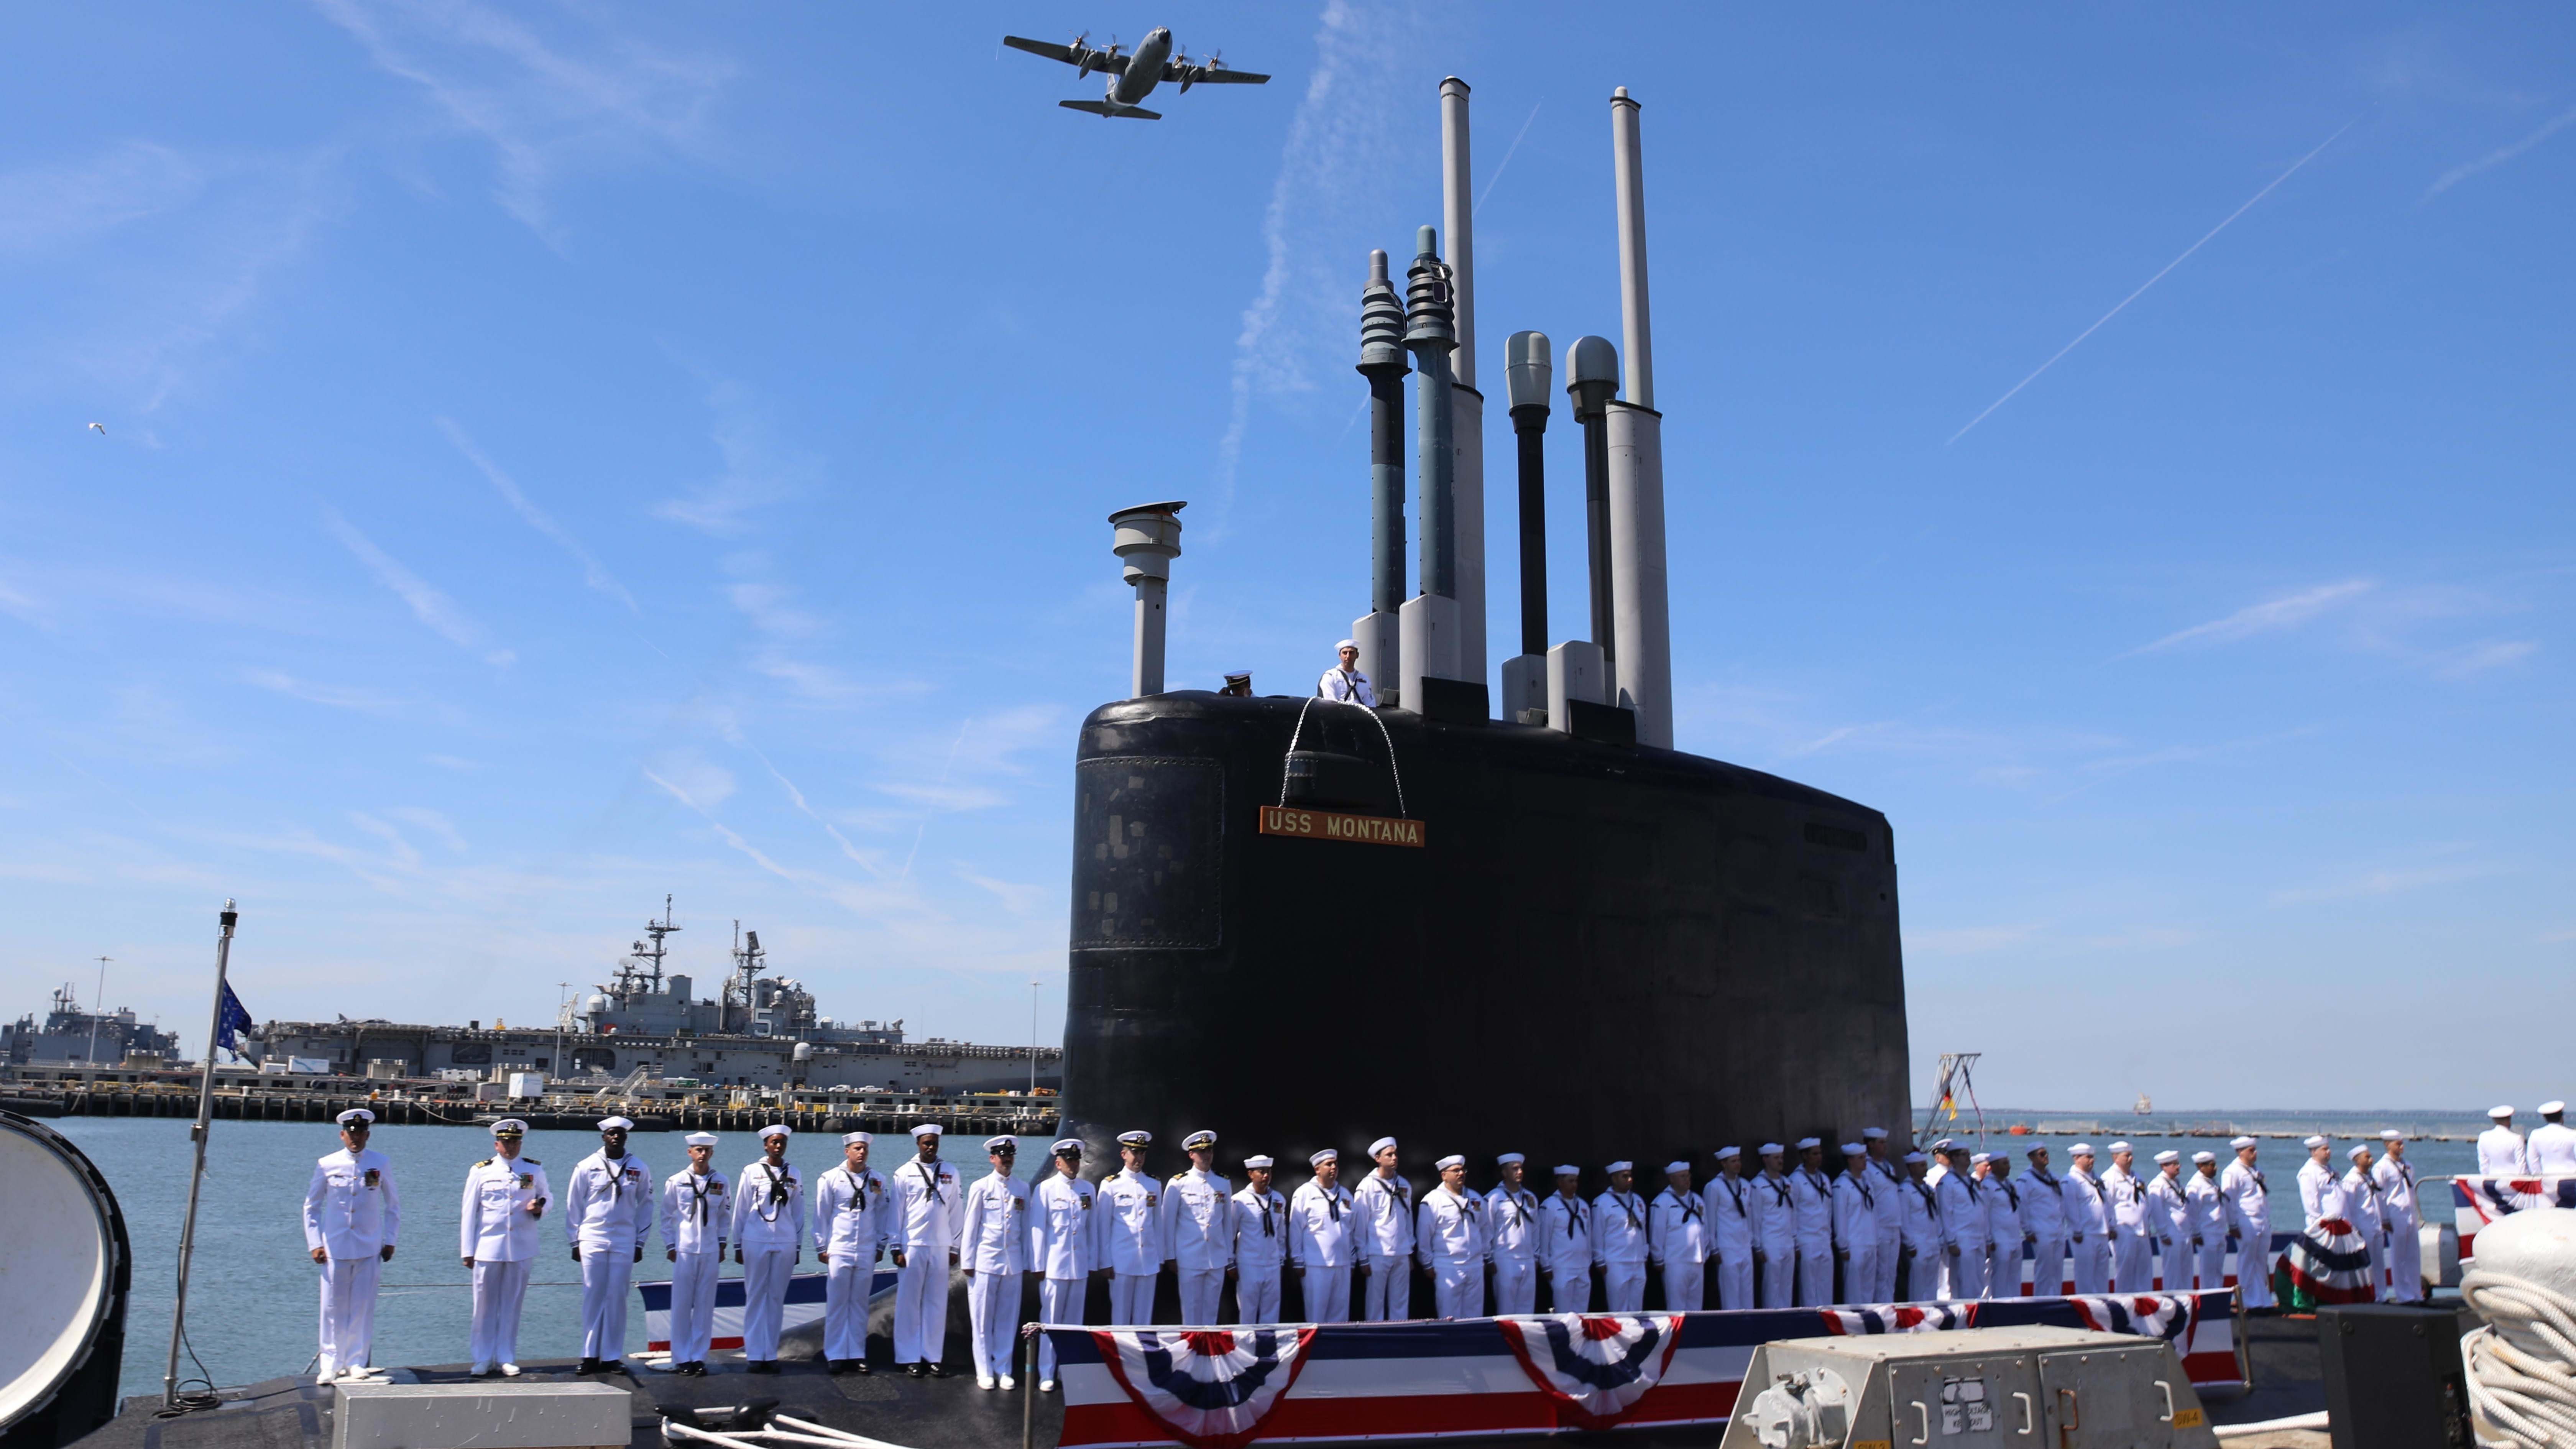 The USS Montana being christened in June, 2022 at Newport News Shipbuilding facility. (Image: Department of Defense)